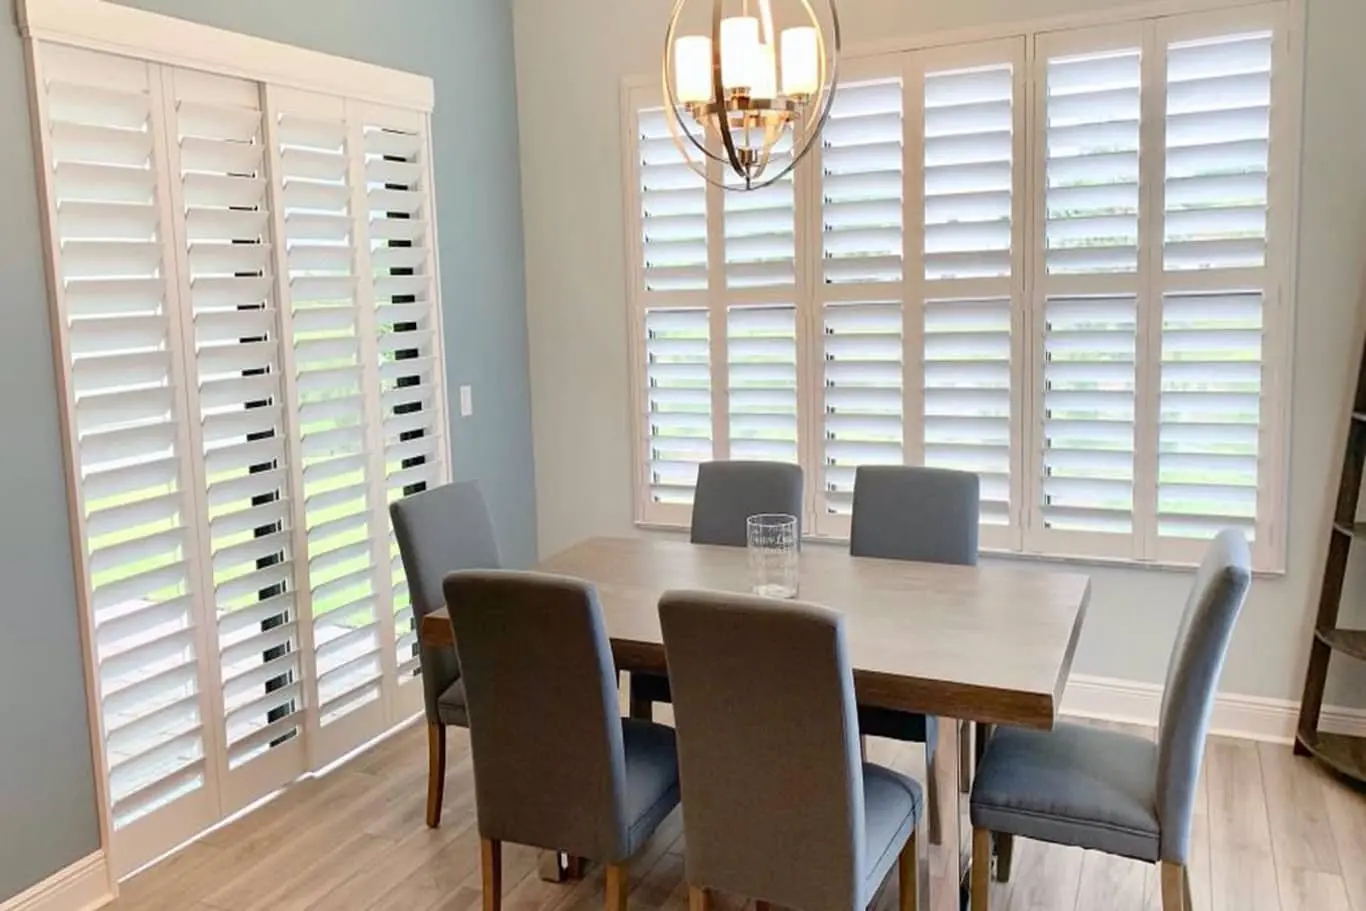 plantation shutters on sliding glass door and window